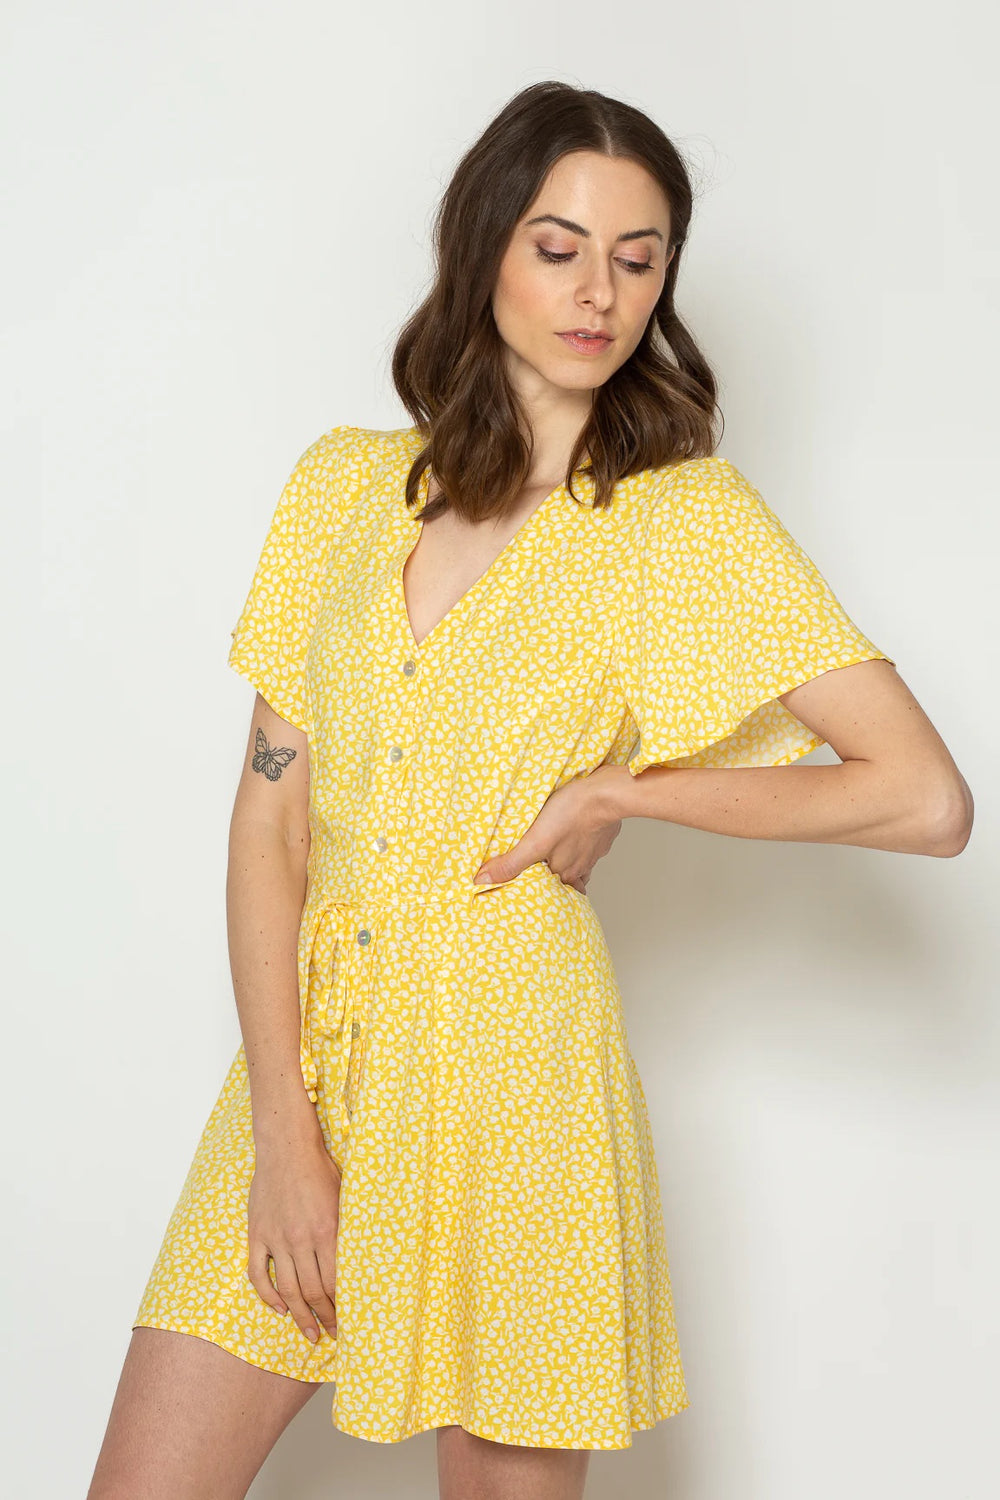 Woman wearing the Julia Dress sewing pattern from Bara Studio on The Fold Line. A dress pattern made in viscose, cotton, linen or Tencel fabrics, featuring a V-neck, button placket, flutter sleeves, mini length, and narrow self-fabric belt.